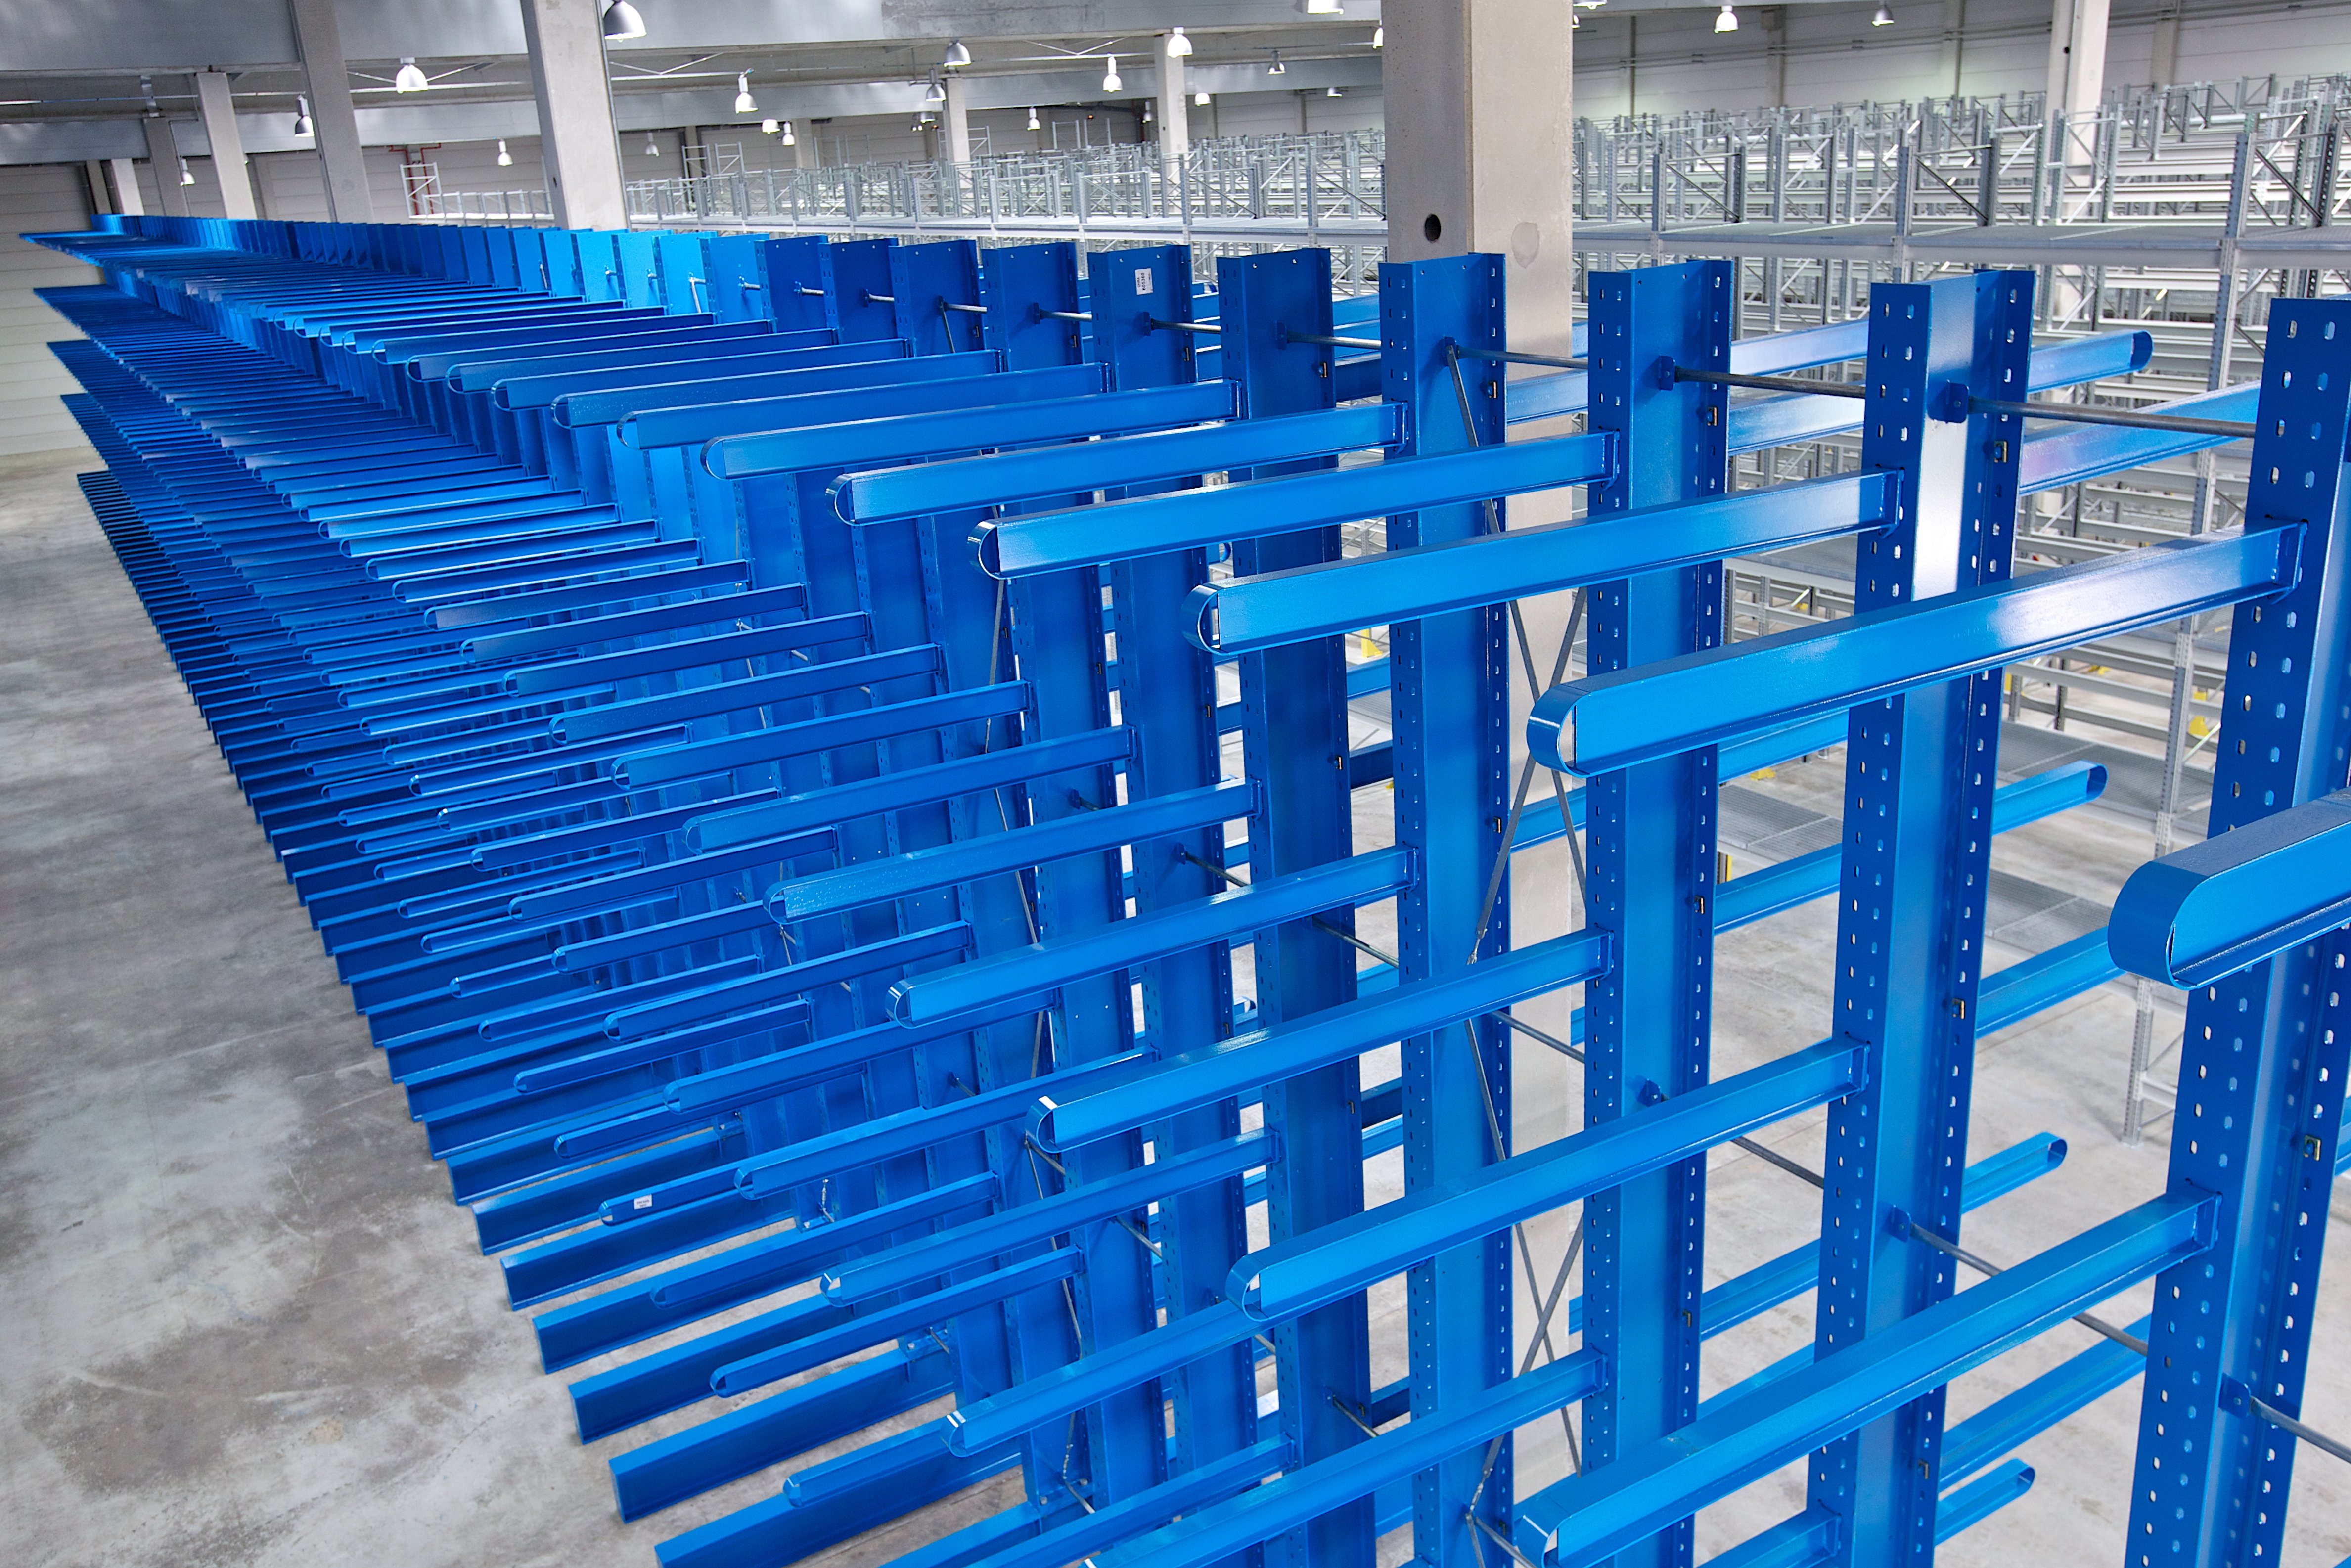 [Translate "Spain"] Cantilever racking system by OHRA